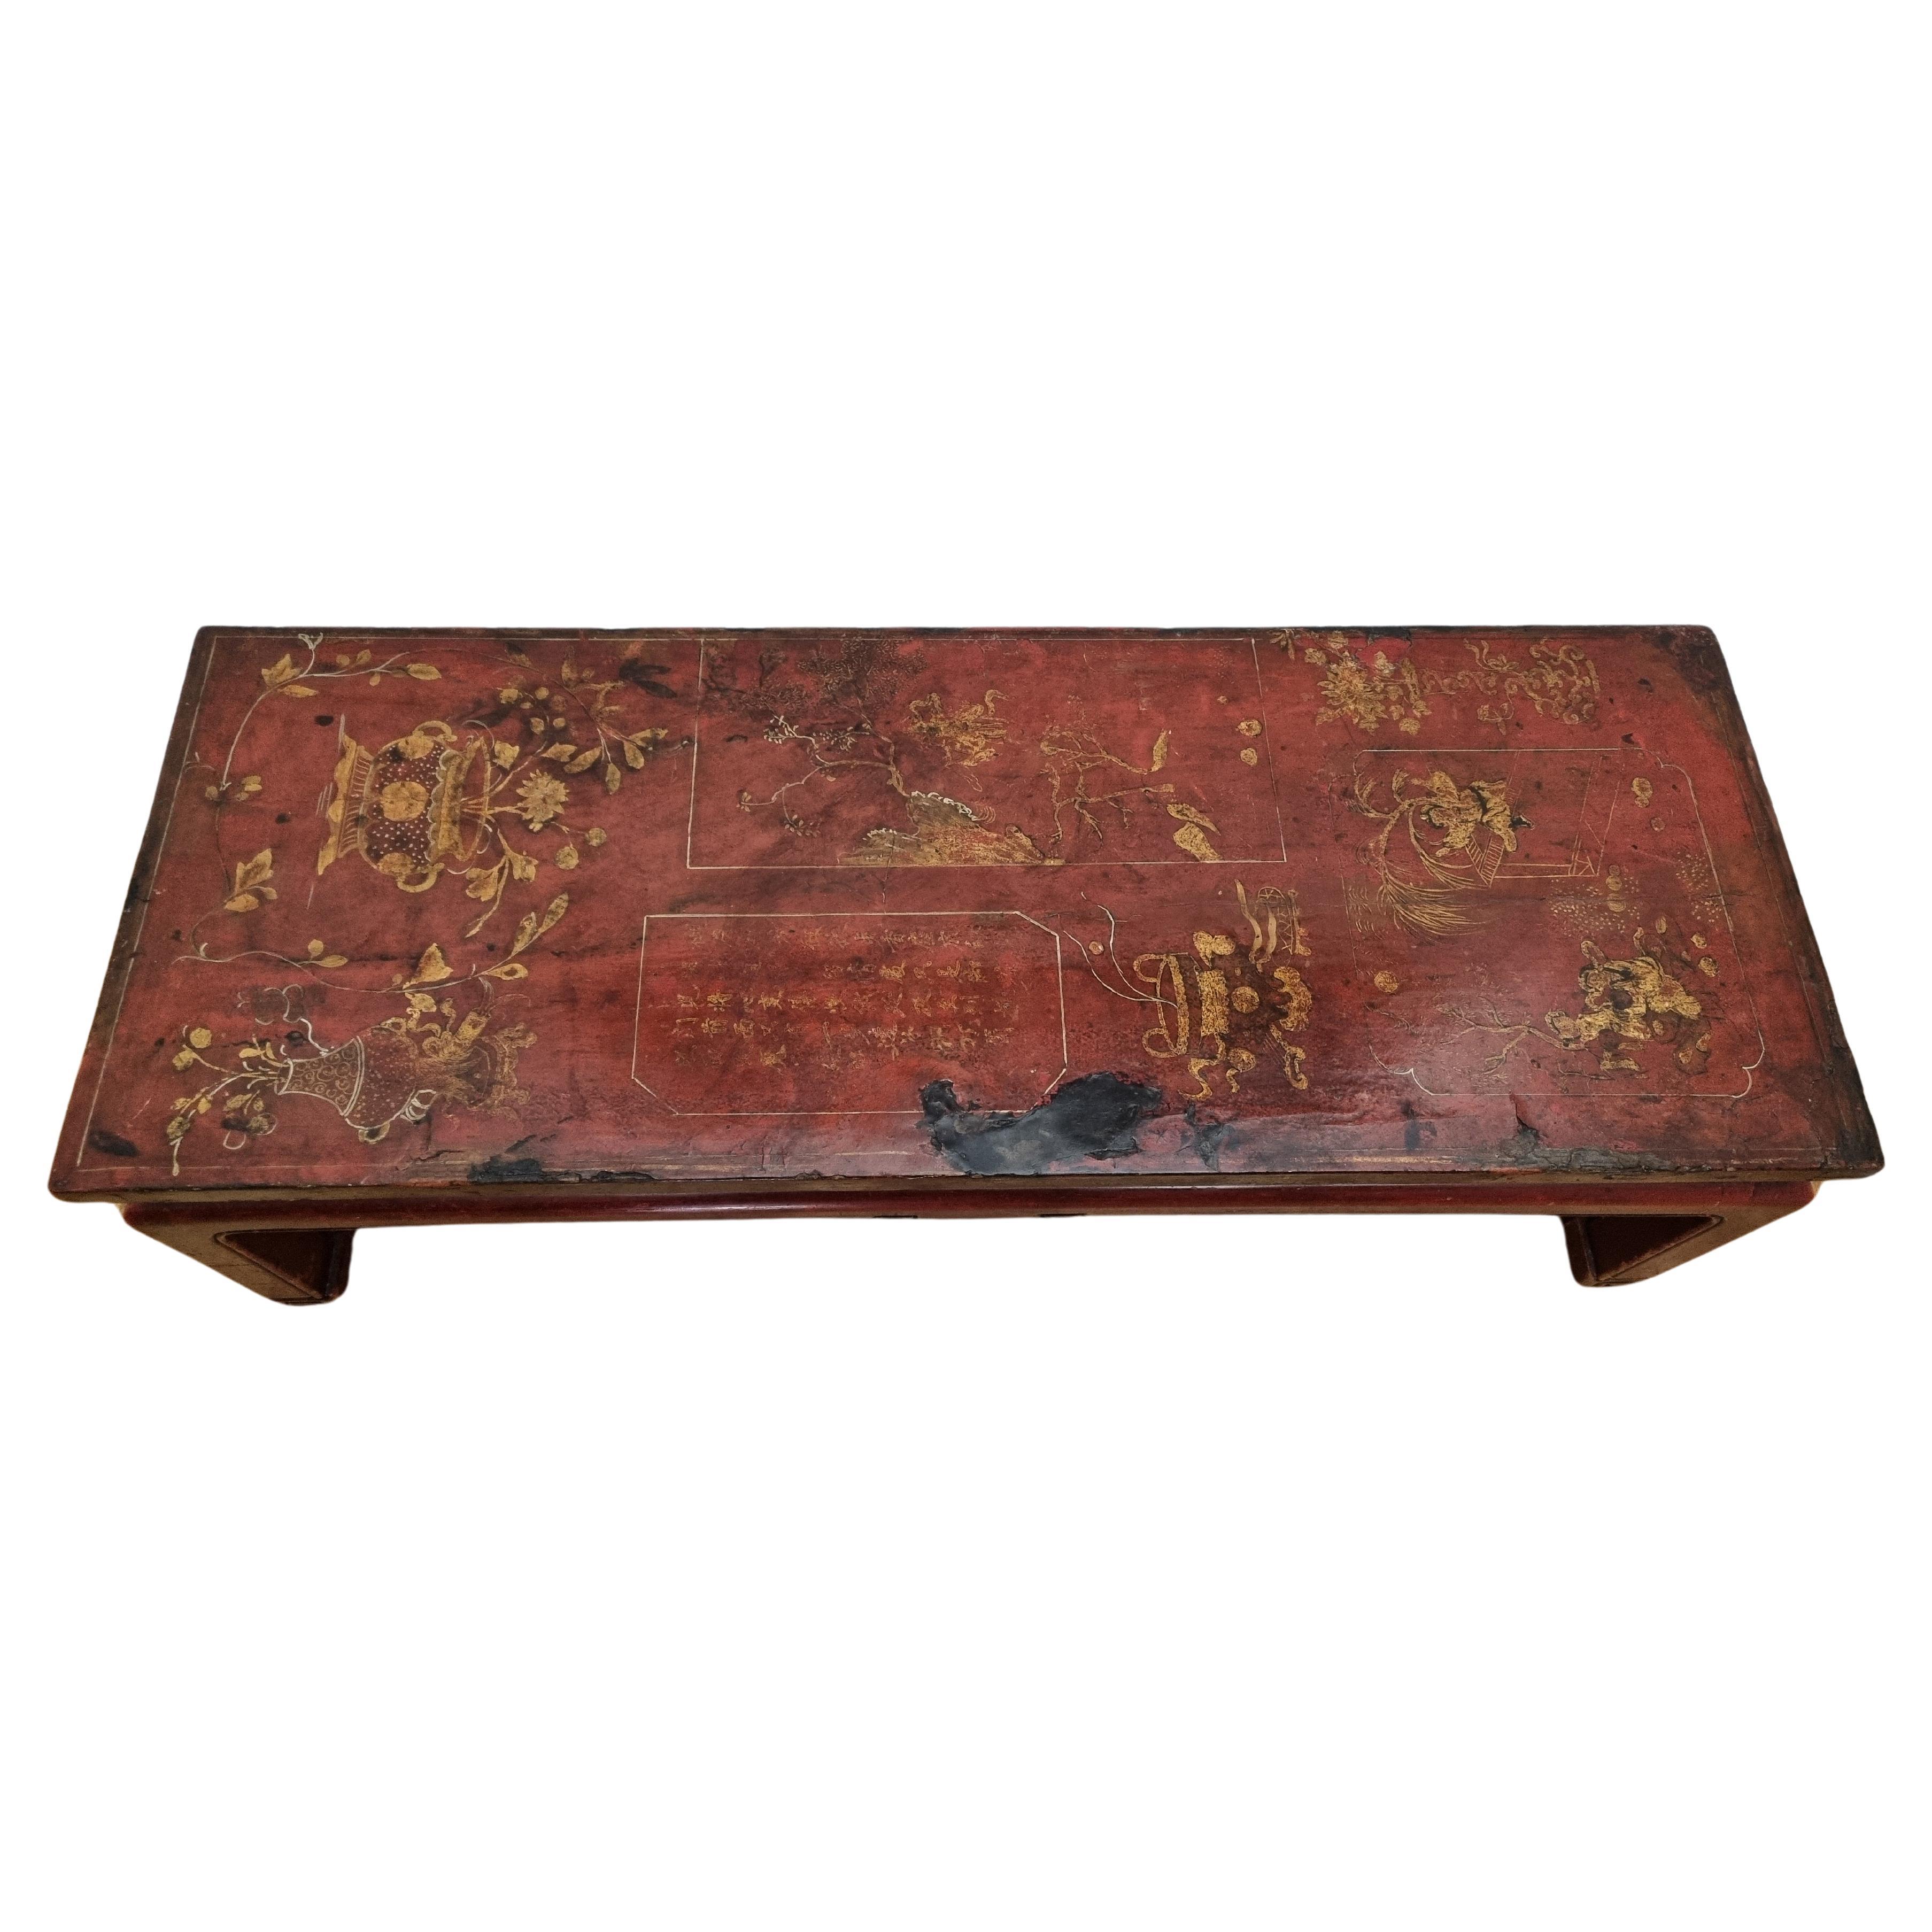 19th Century Red Lacquered Chinese Low Coffee Table from Shanxi Province For Sale